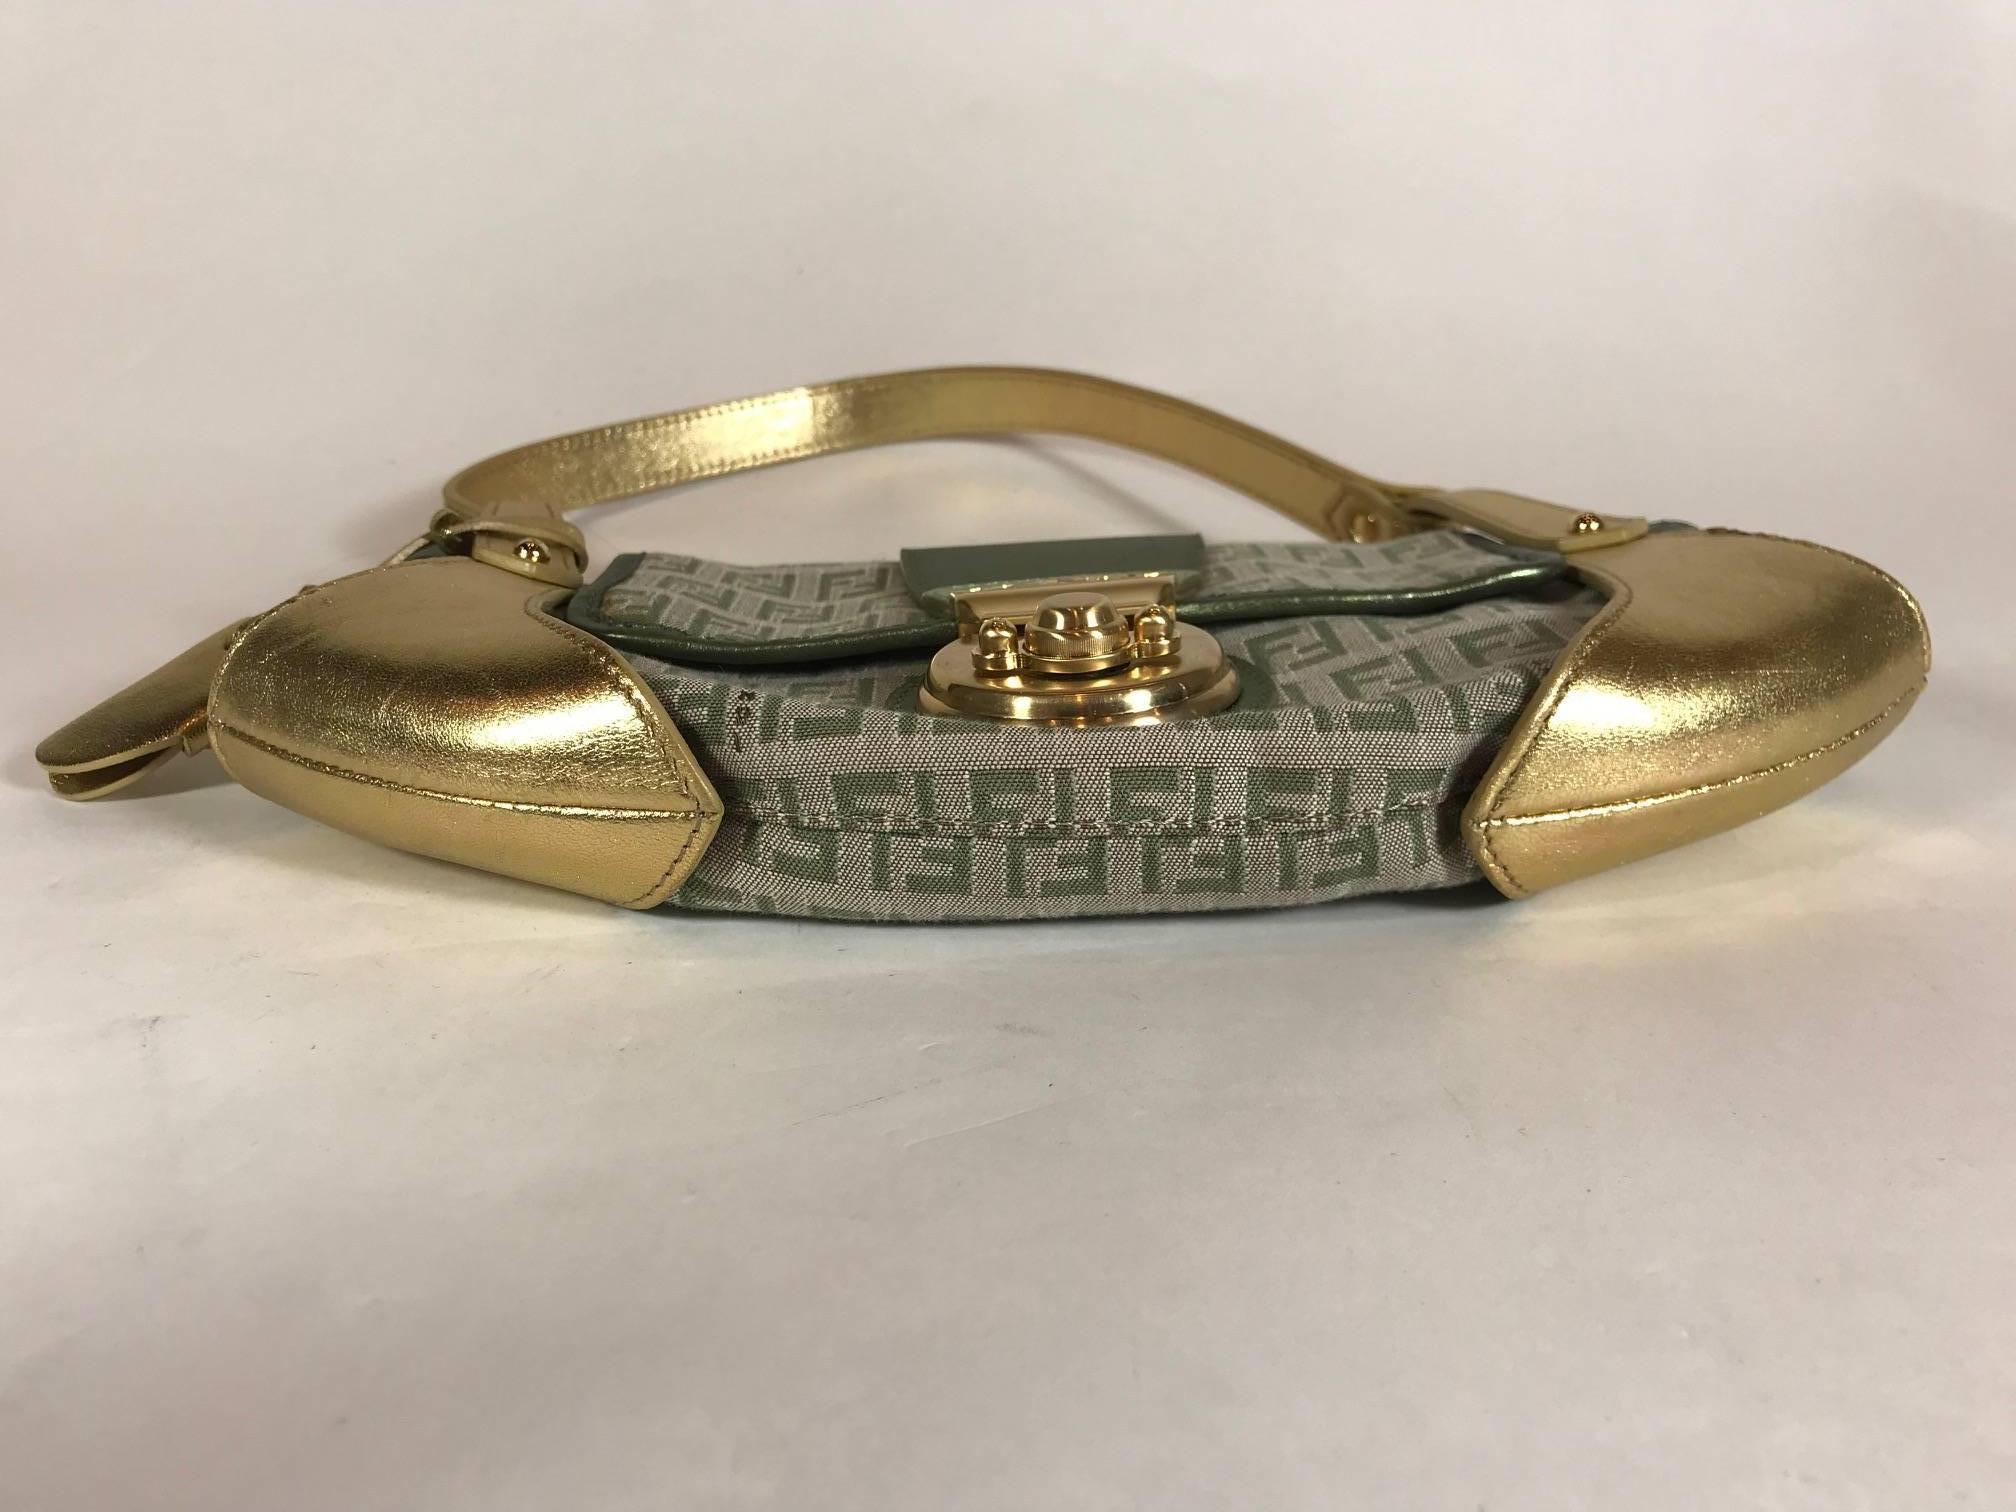 Fendi Gold and Green Metallic Handbag In Excellent Condition For Sale In Roslyn, NY